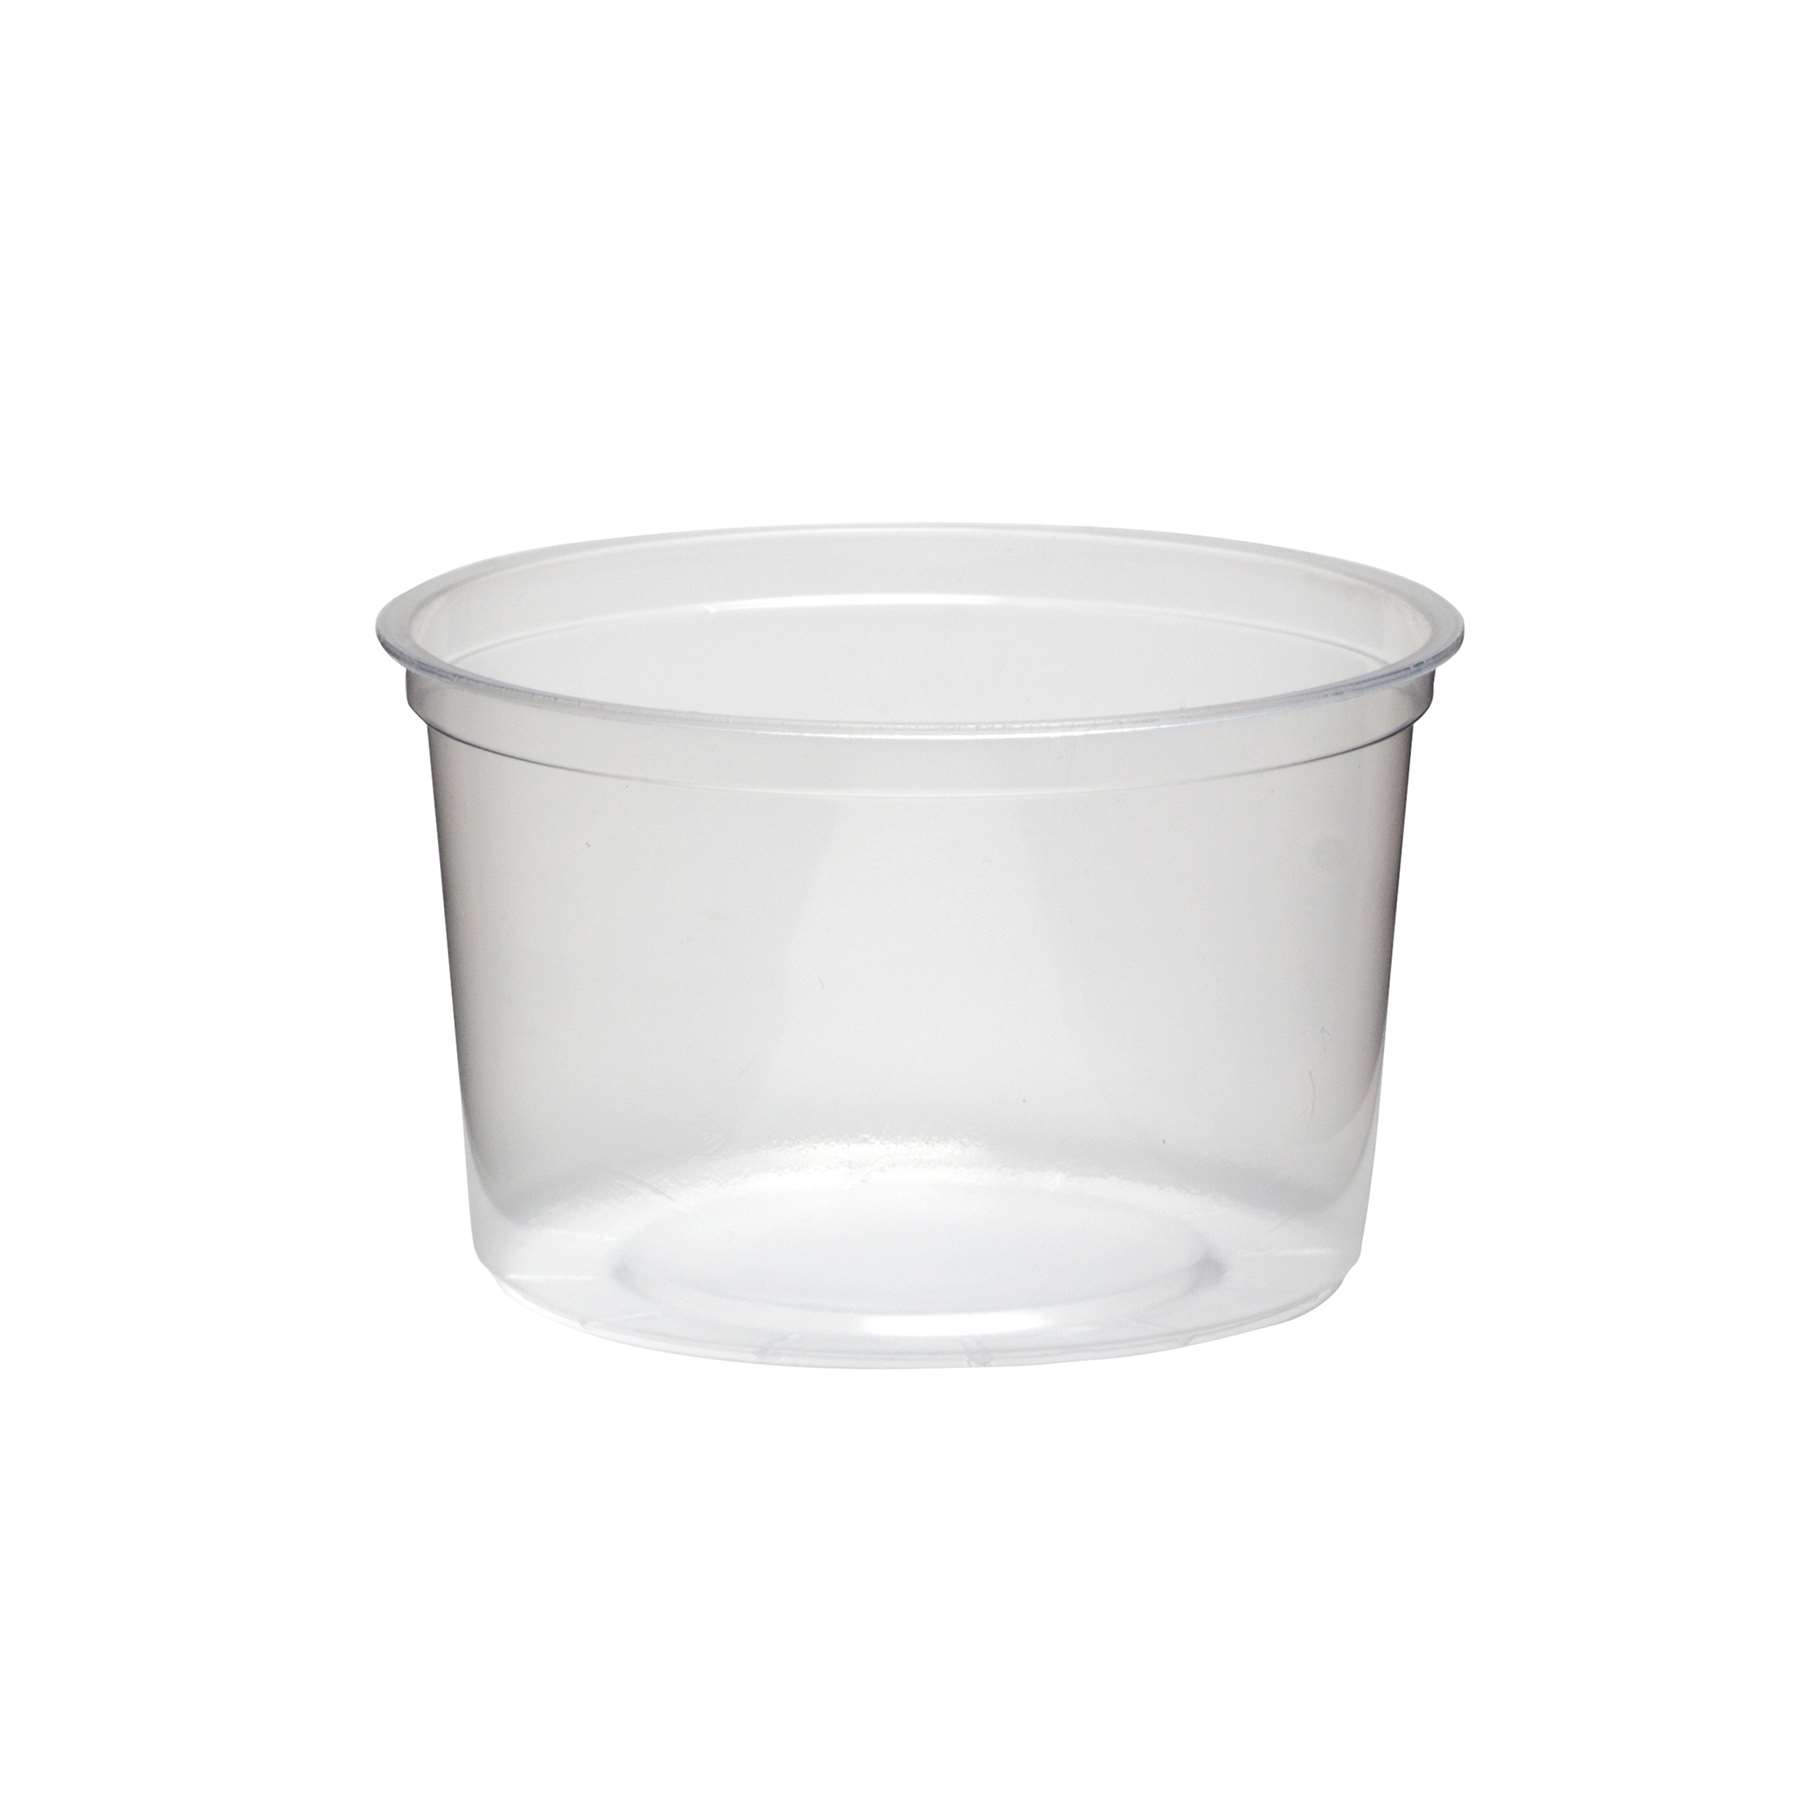 DELI CONTAINER, 16OZ ROUND TALL CLEAR POLYPRO